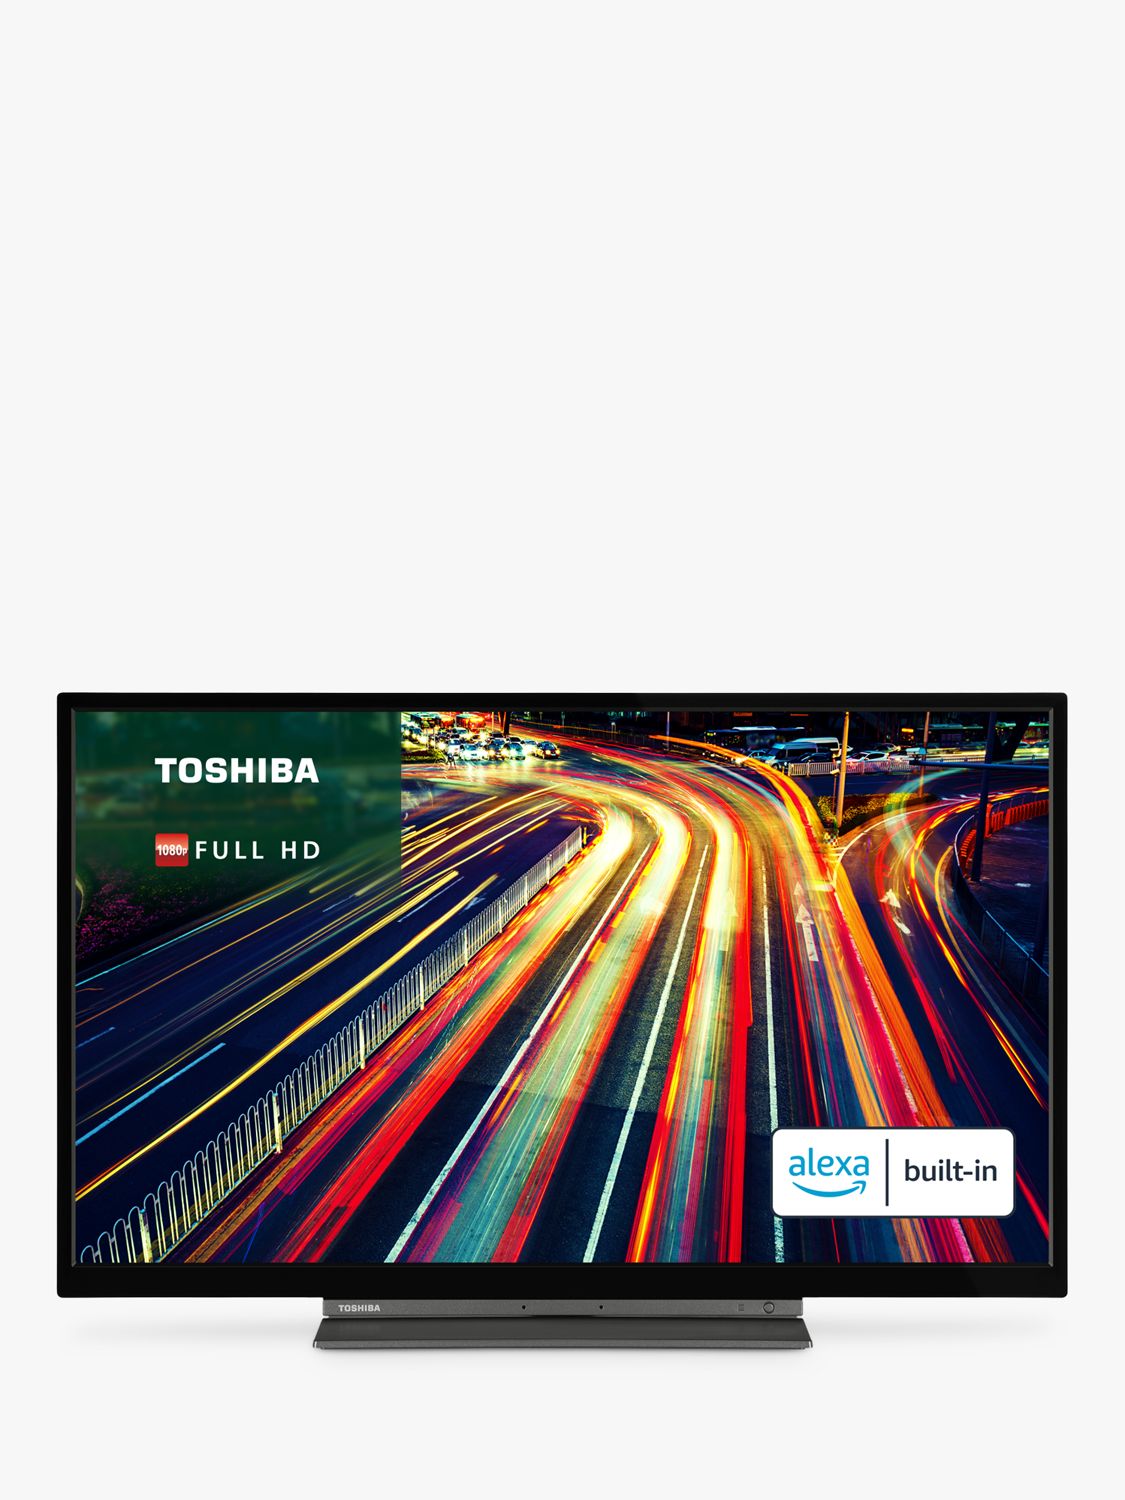 Toshiba (2022) LED HDR Full HD 1080p Smart TV, 32 inch with Freeview Play, Black